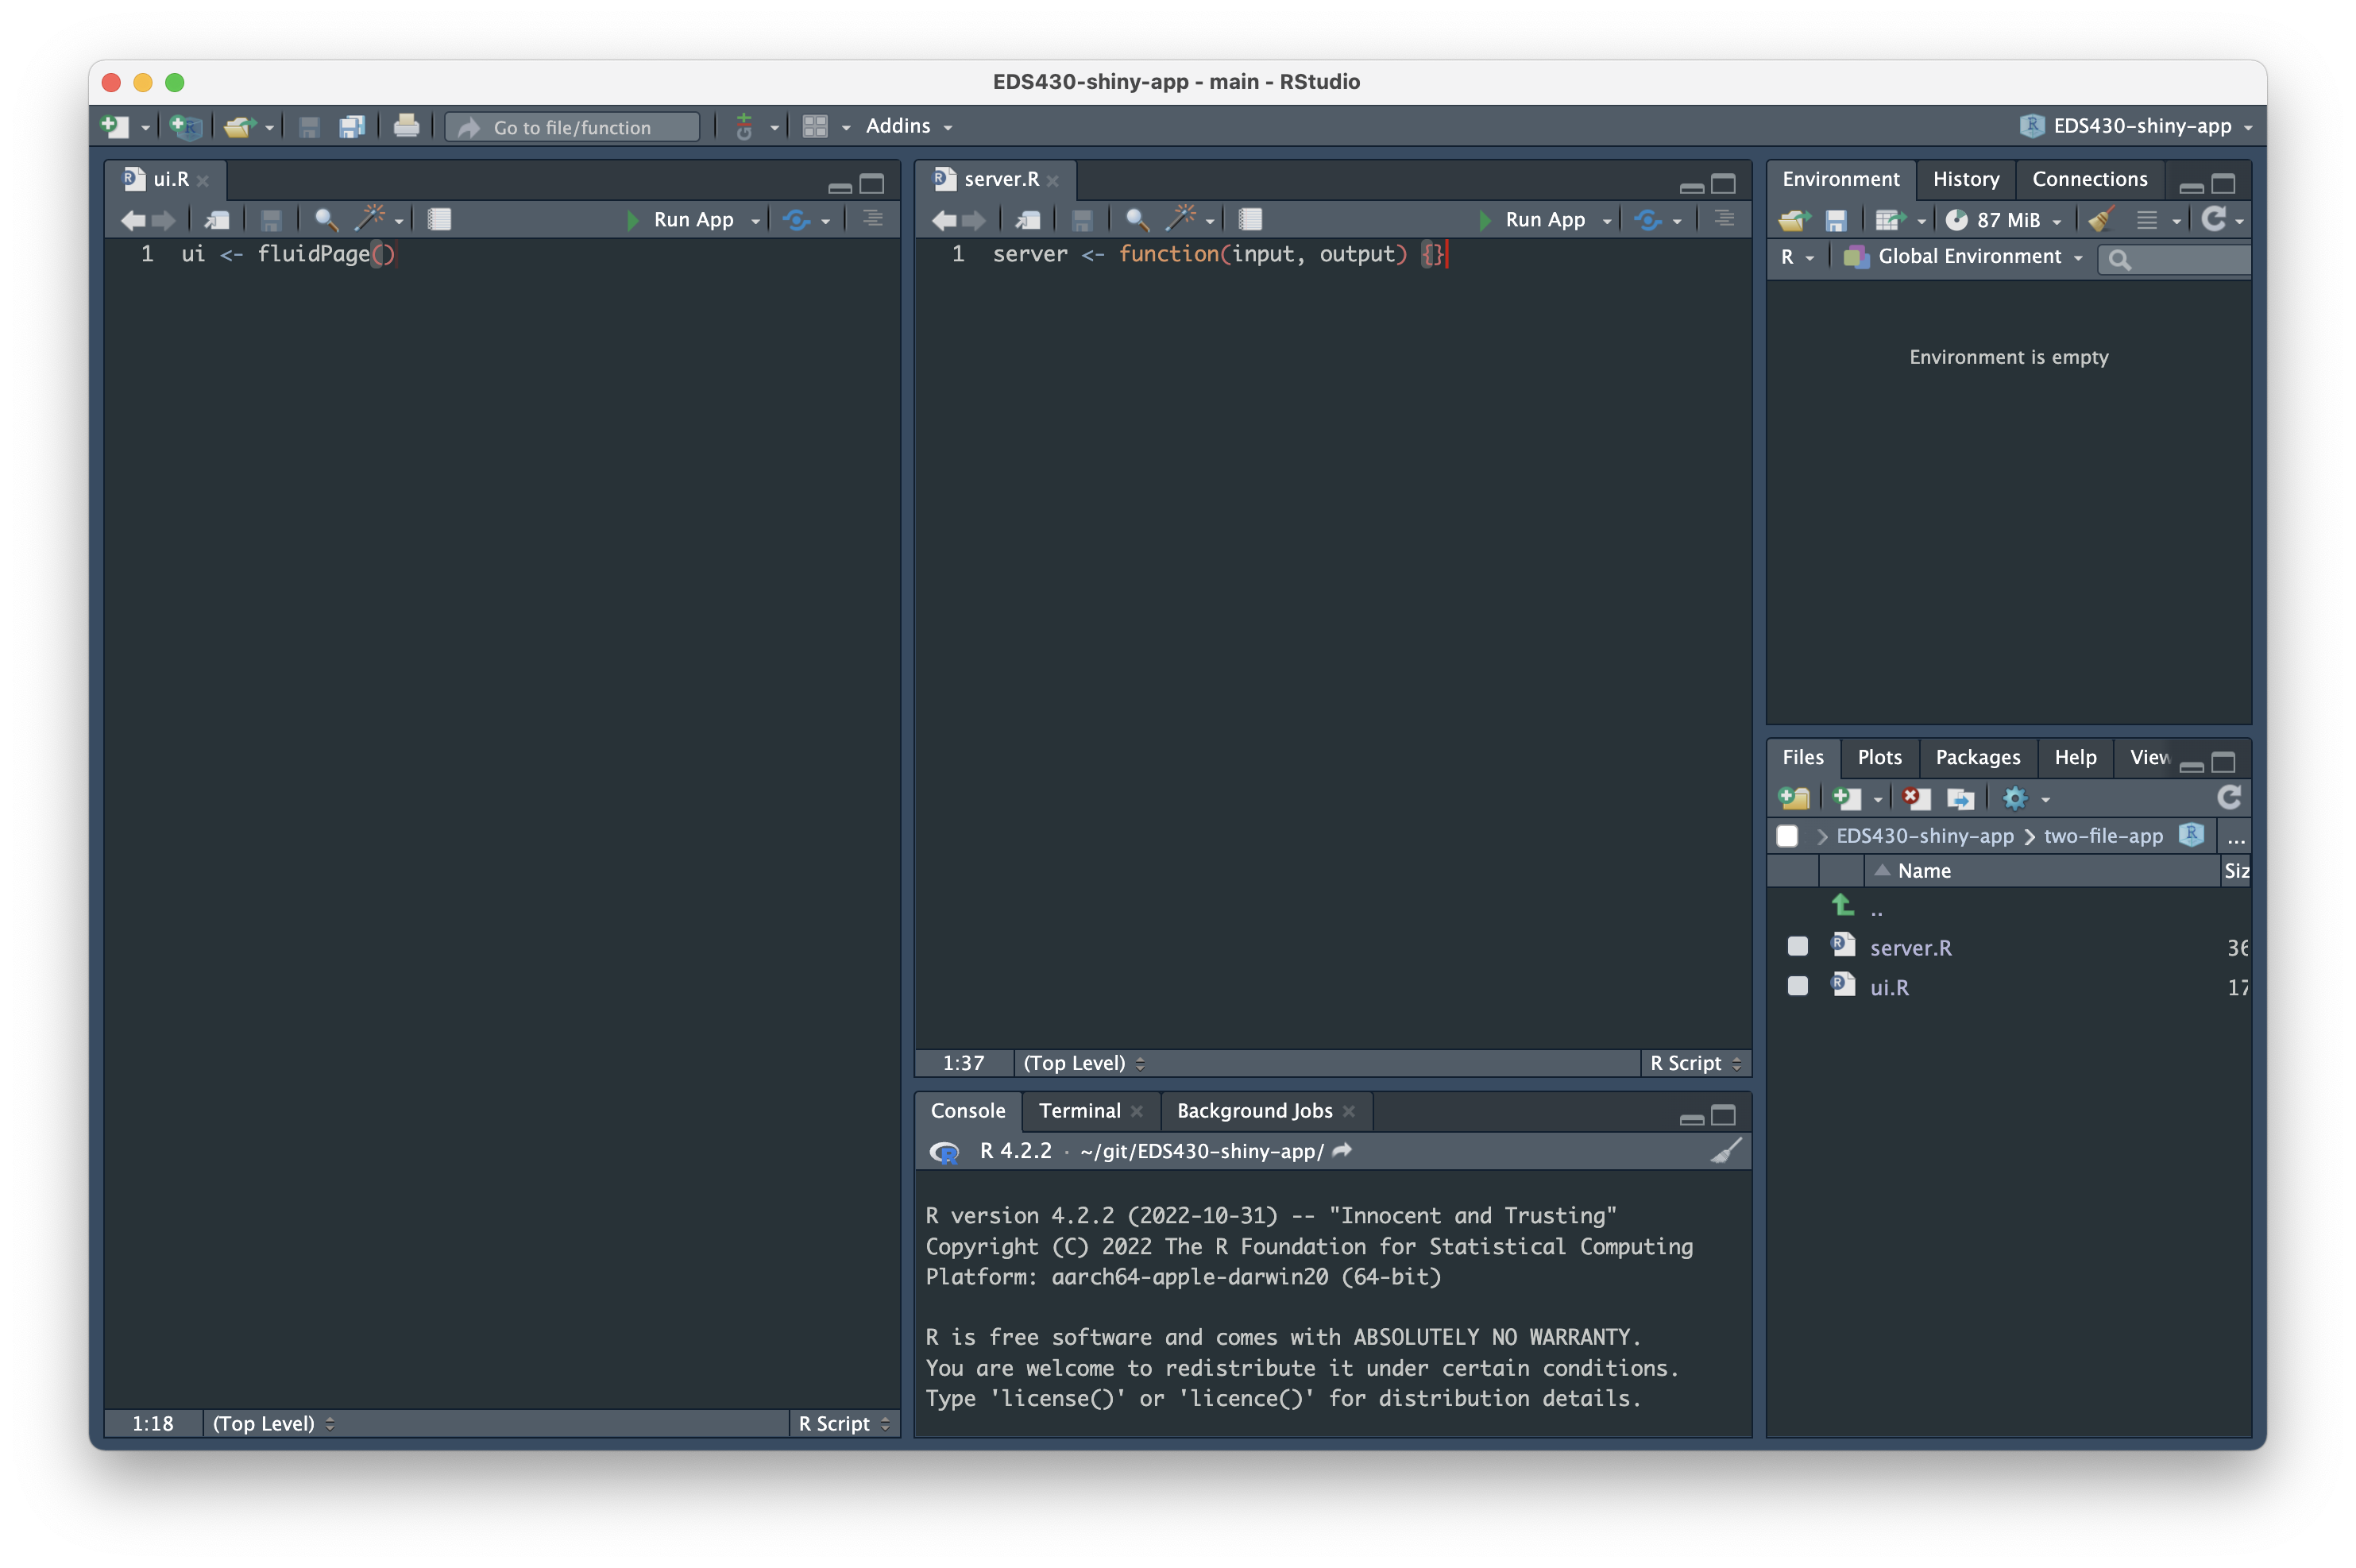 RStudio with three columns. (From left to right): (1) a source pane with `ui.R` open (2) a second source pane on the top with `server.R` open and the console on the bottom, (3) Environment/History/Git/etc. on the top and Files/Plots/Packages/etc. on the bottom